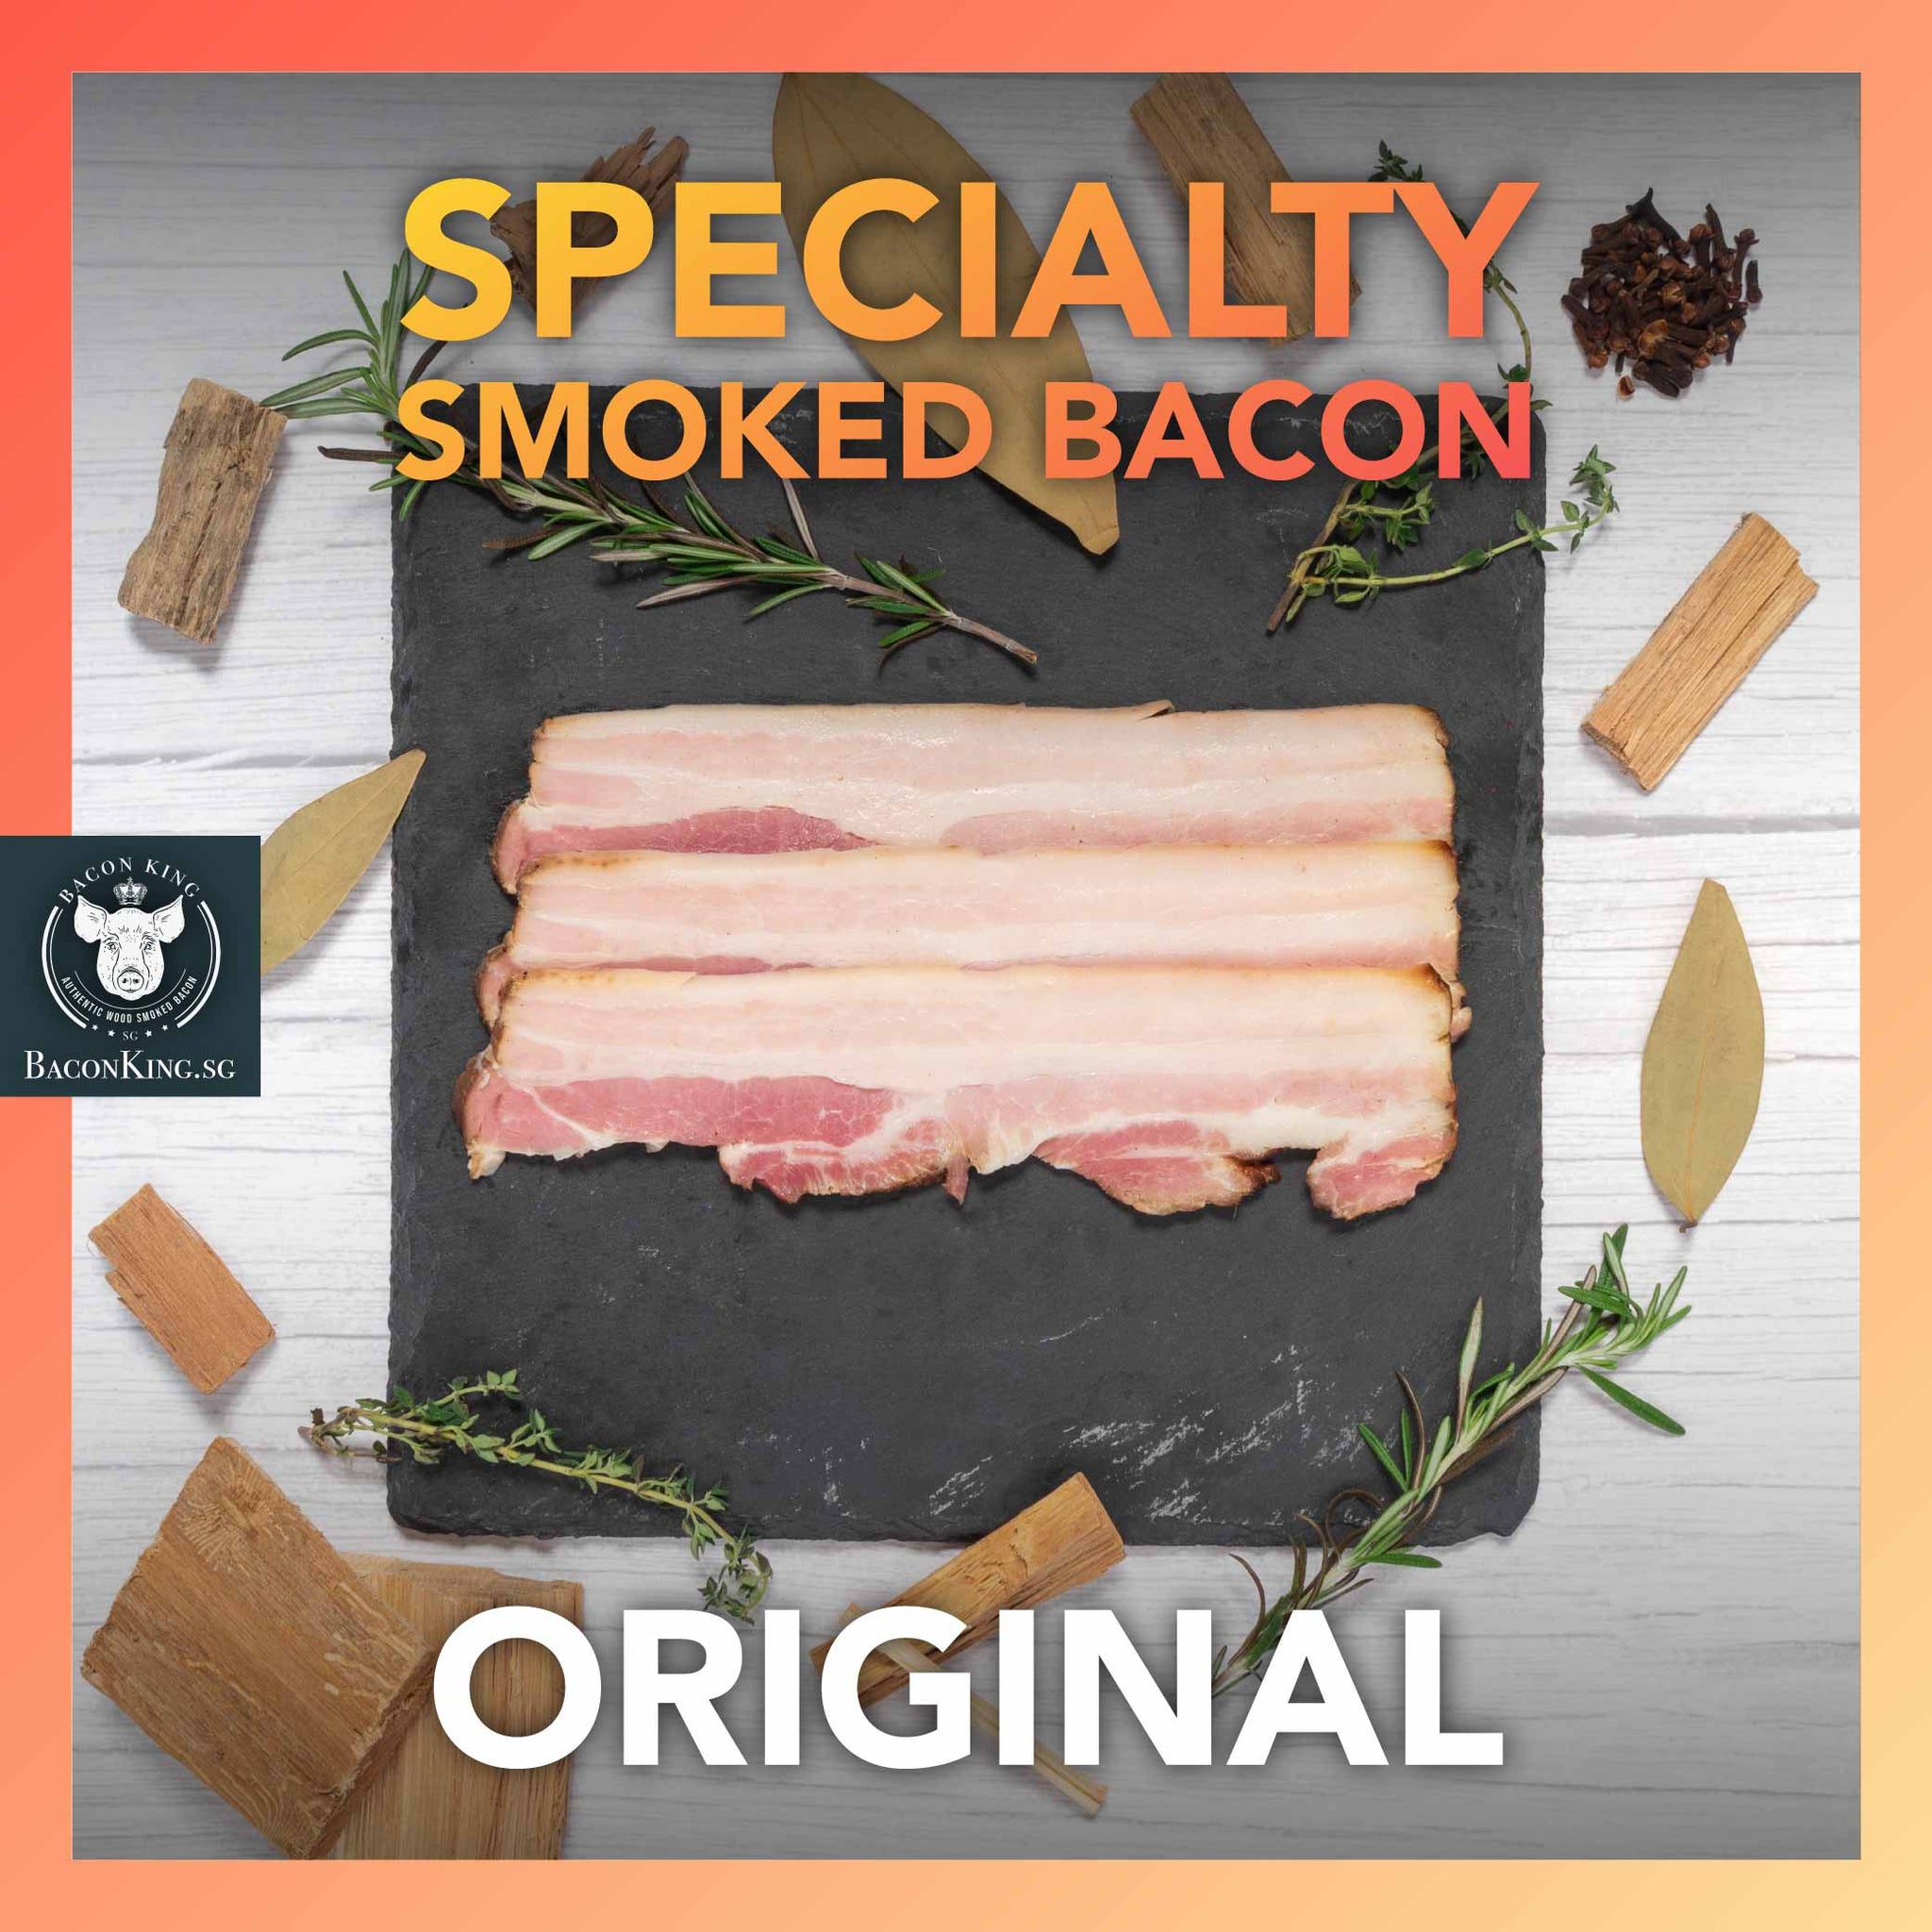 Slices of Specialty Smoked Bacon on Stone Plate with Bay Leaves, Rosemary, Thyme, Cloves, Applewood chips decorating the side, against a marble background